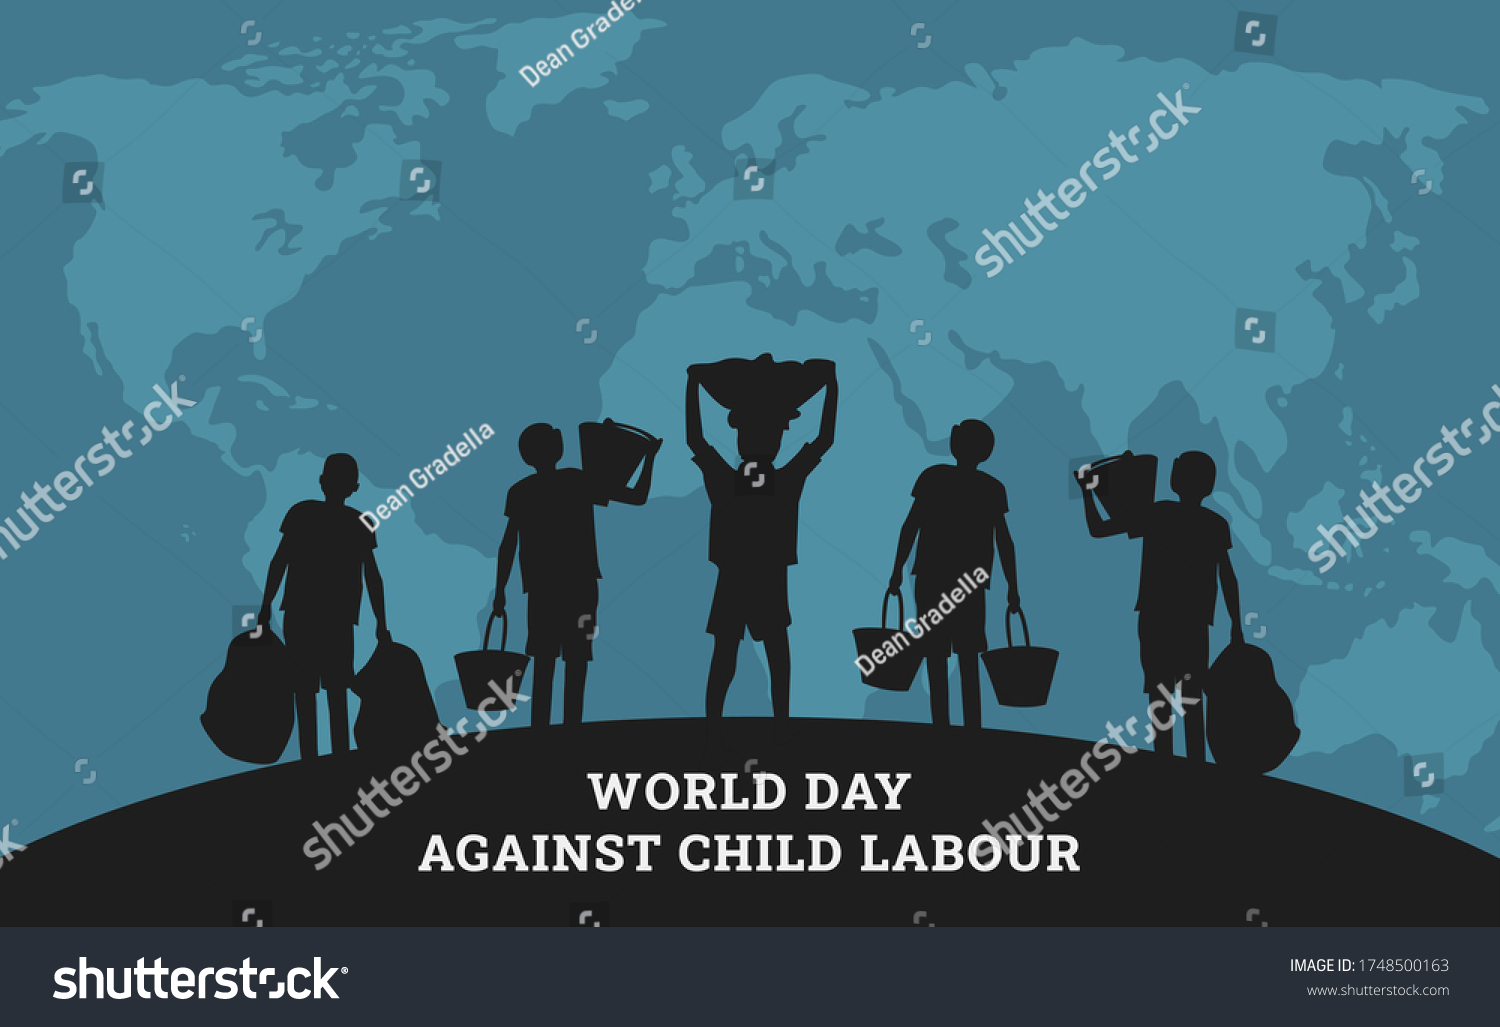 SVG of World day against child labour background with world map and children in black silhouette. Flat style vector illustration concept of child abuse and exploitation campaign for poster and banner. svg